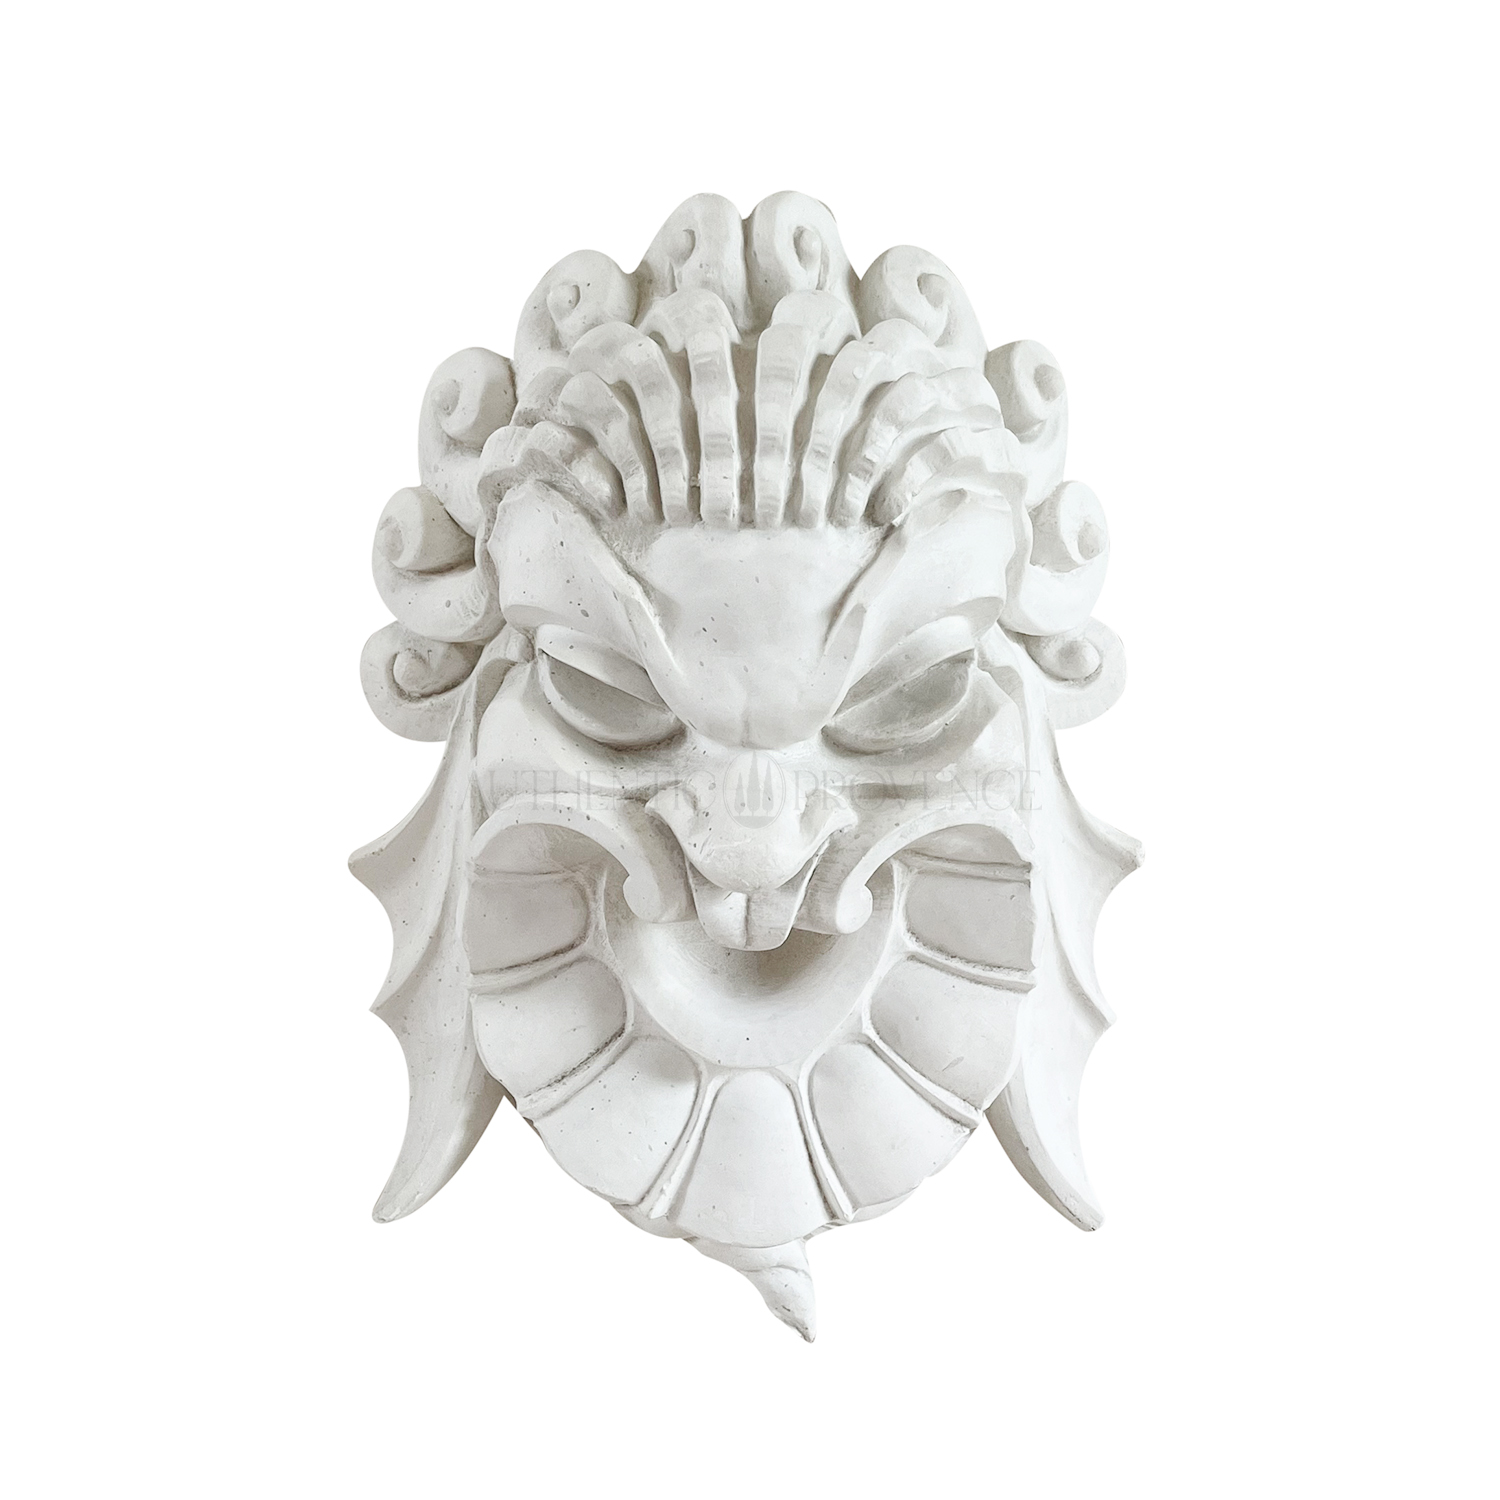 Grotesque Mask in Plaster